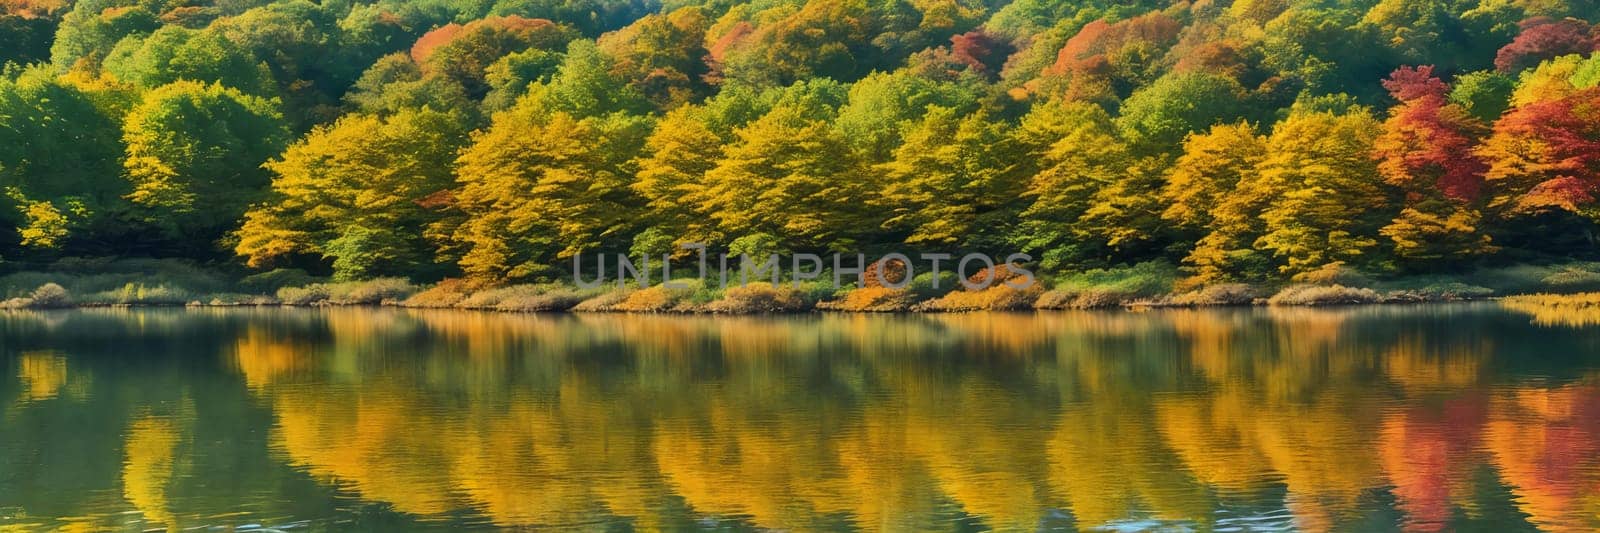 Colorful palette of autumn, focusing on a tranquil lake reflecting the vibrant foliage by GoodOlga